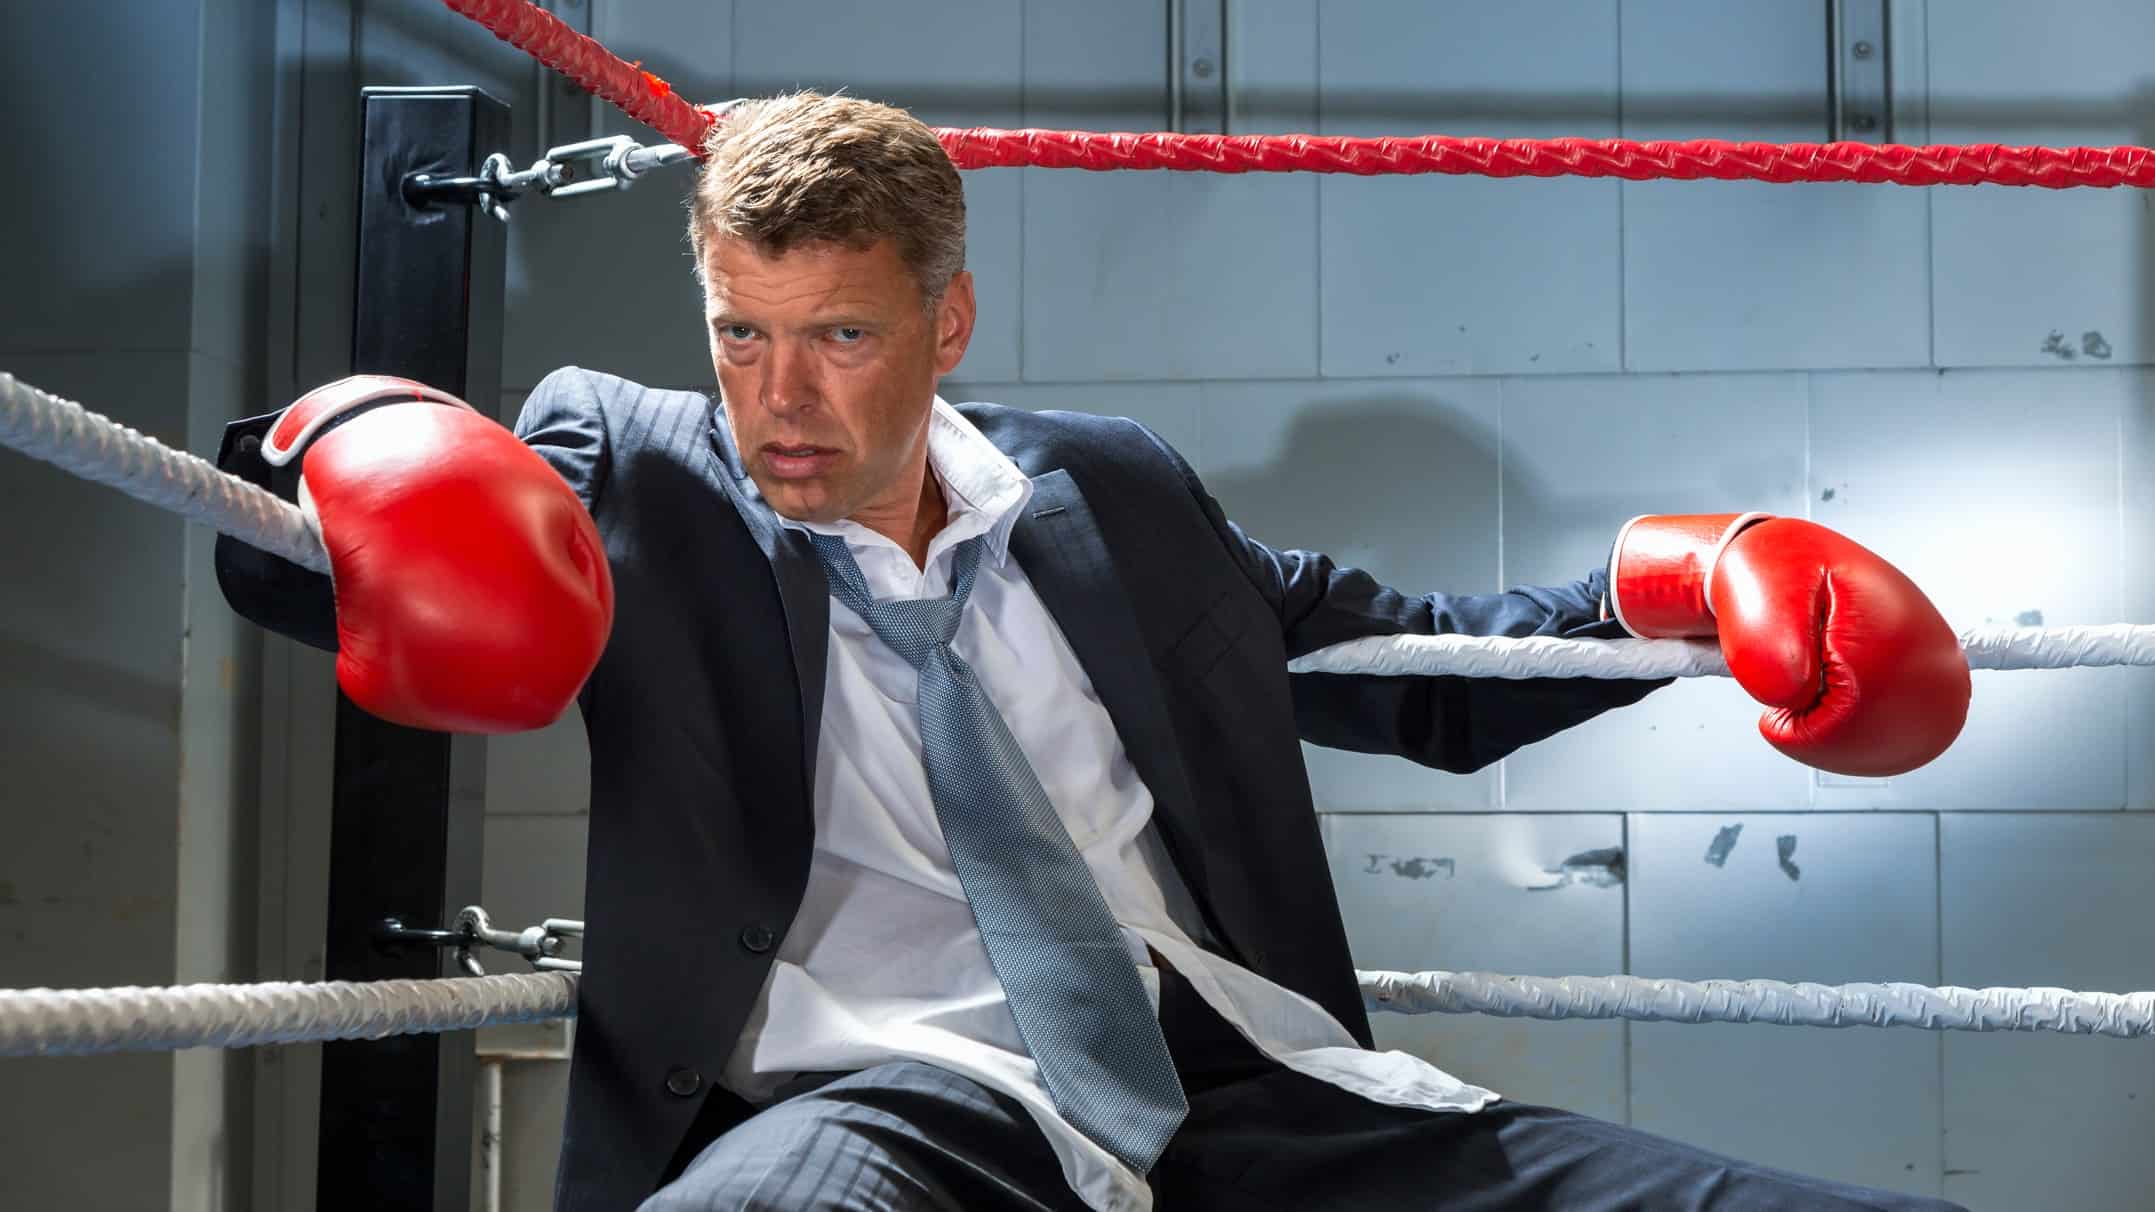 A businessman in a suit and wearing boxing gloves, slump in the corner of a ring, indicating a corporate fight between ASX companies